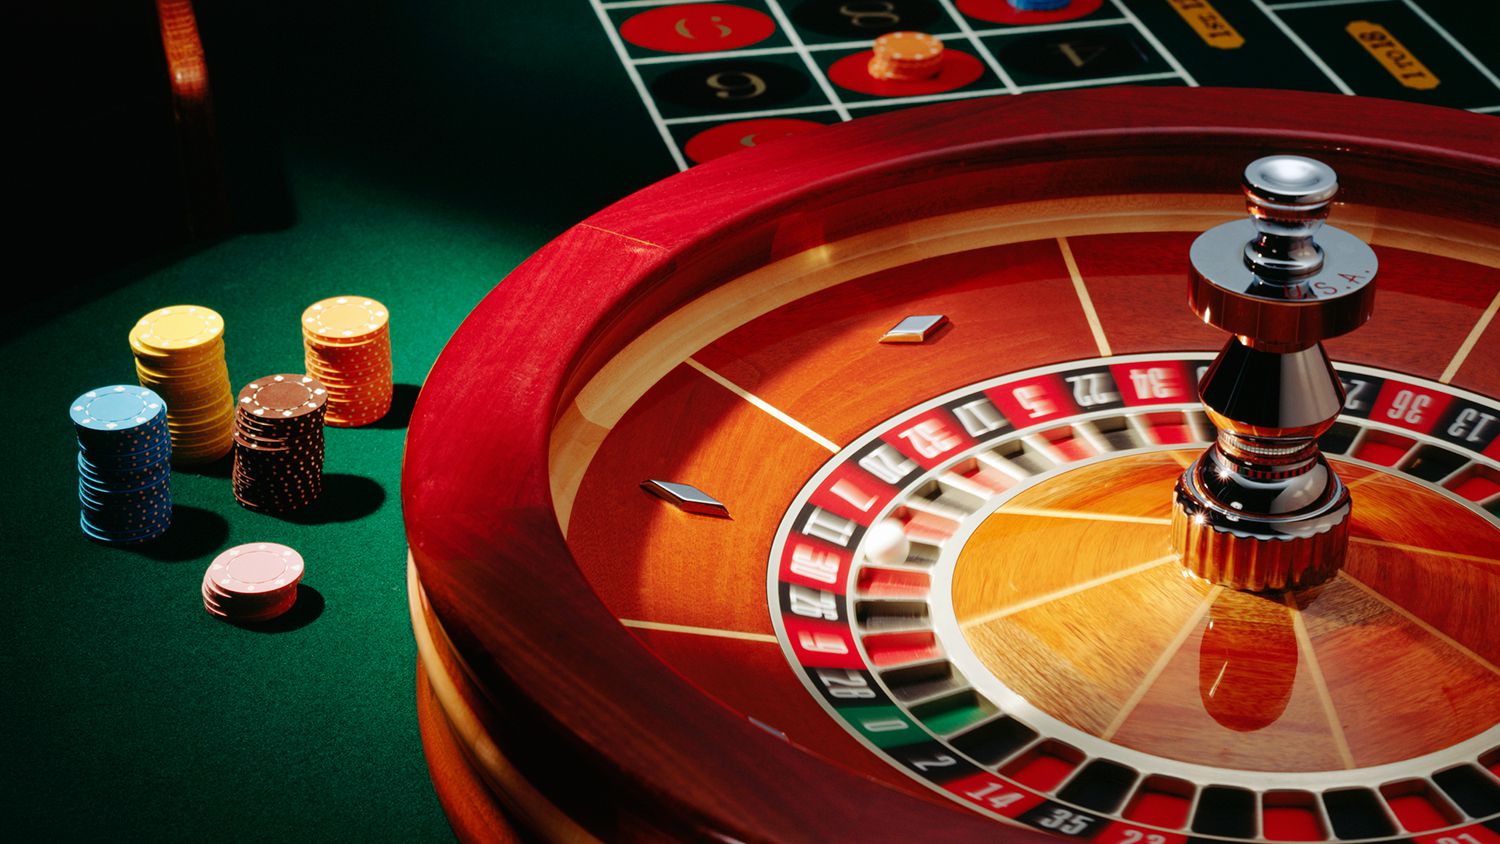 More about the game of Roulette